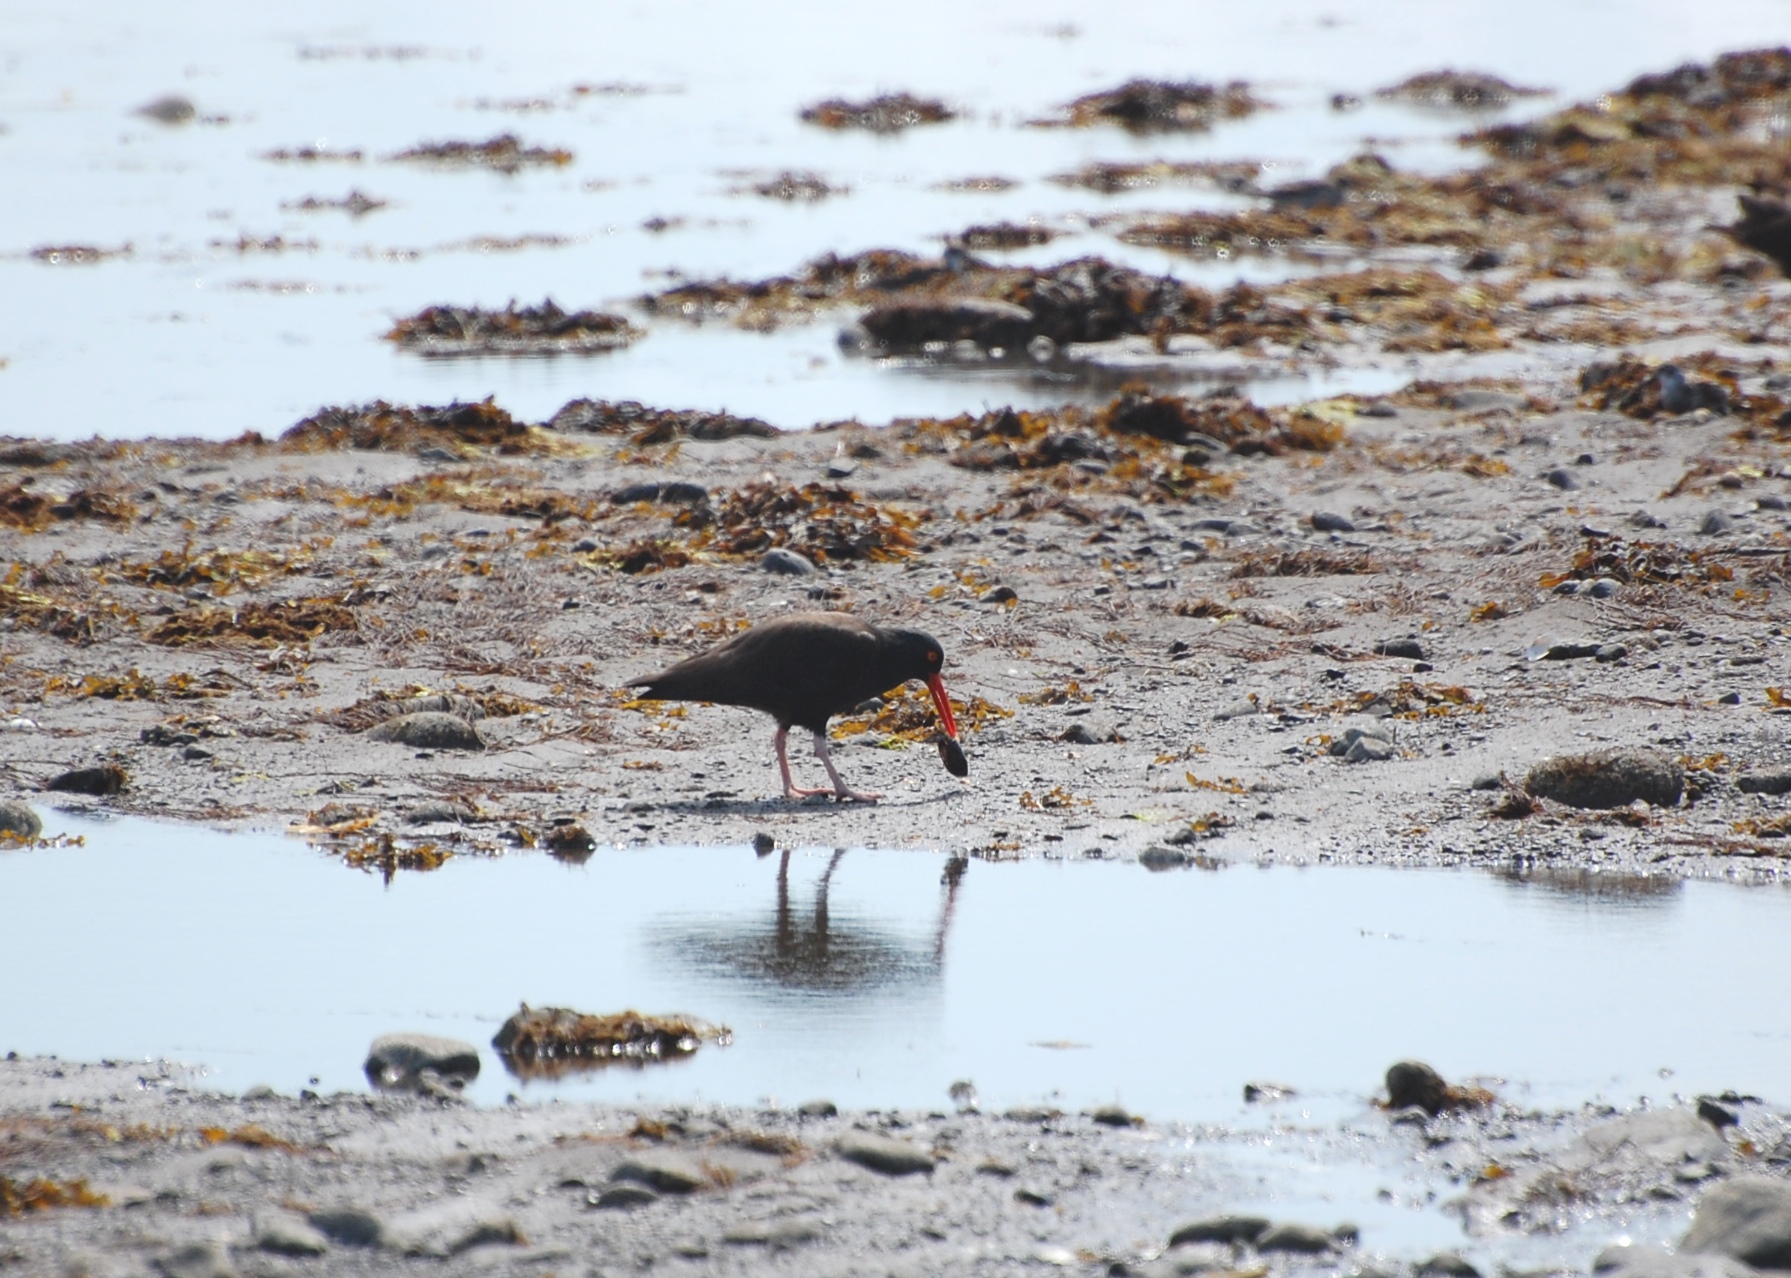 A black oystercatcher on a beach. The oystercatcher is black with a bright orange beak. The beach is partially covered in water and pieces of orange-brown kelp are scattered around.